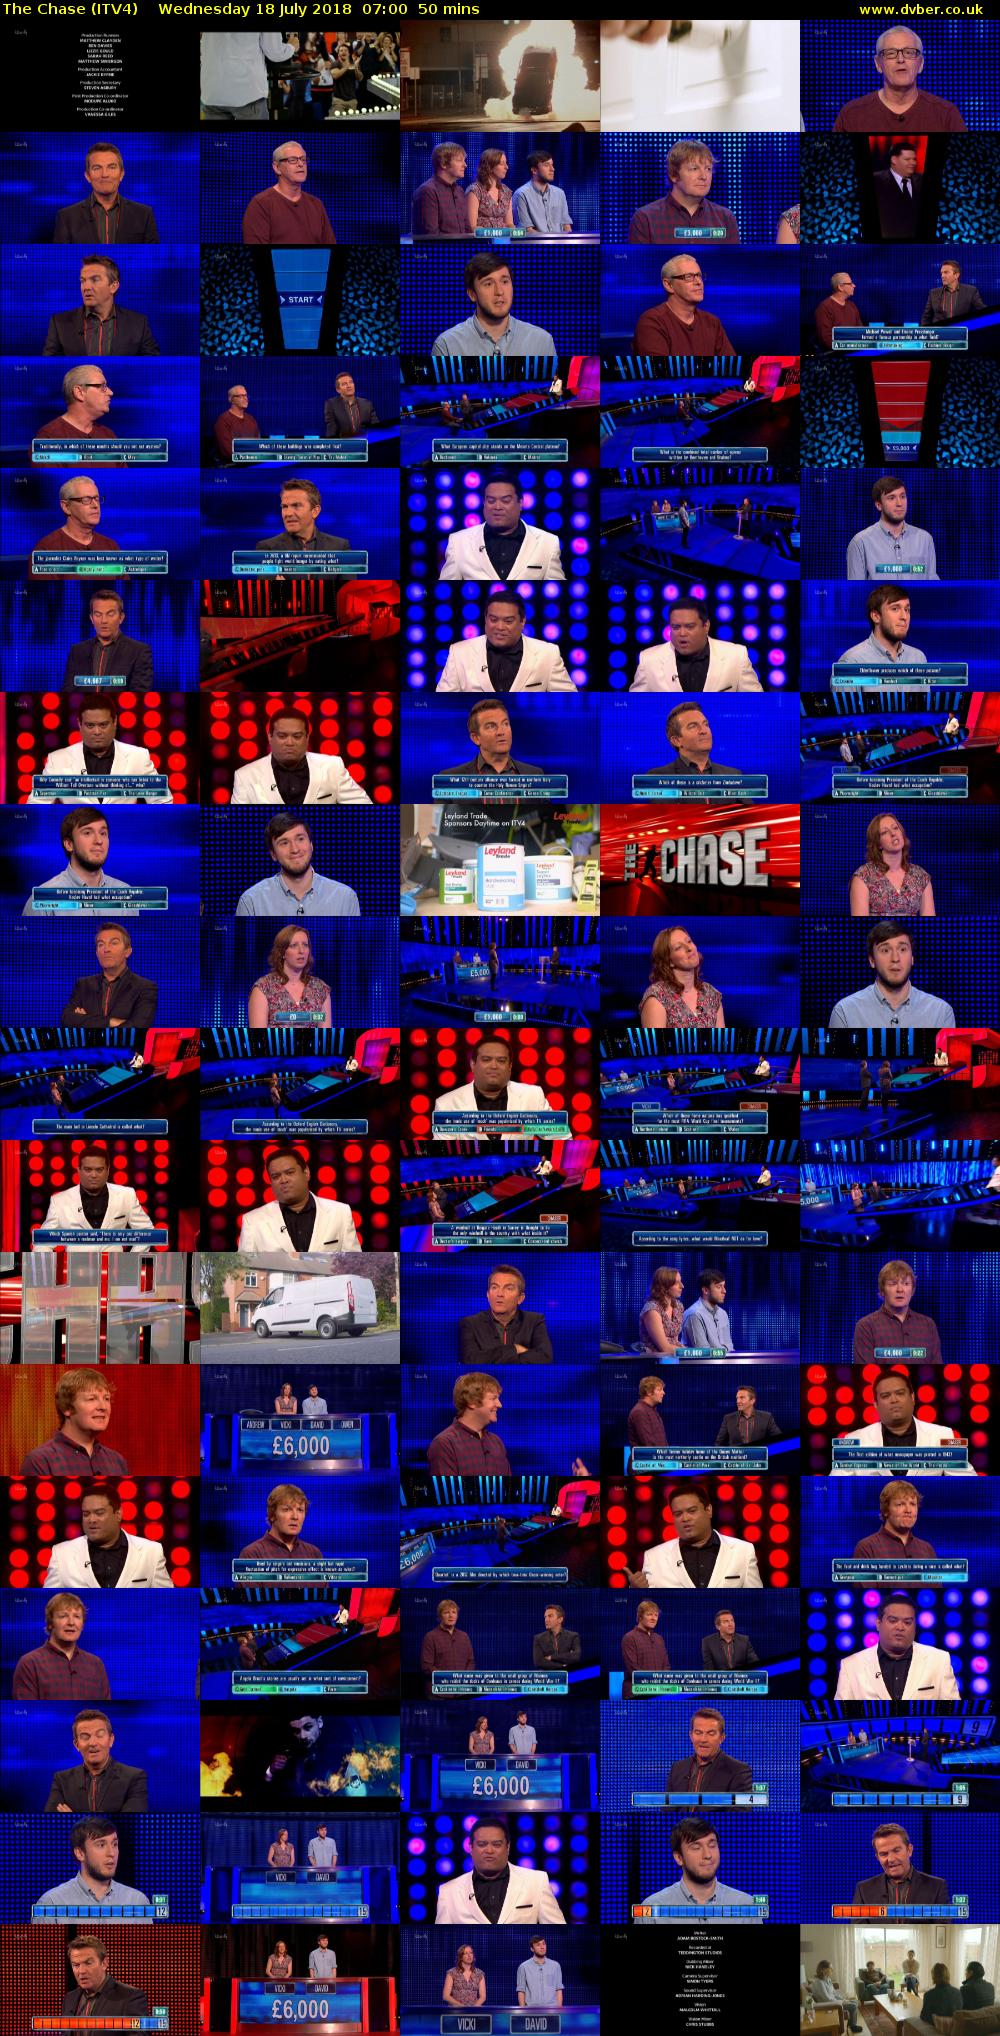 The Chase (ITV4) Wednesday 18 July 2018 07:00 - 07:50